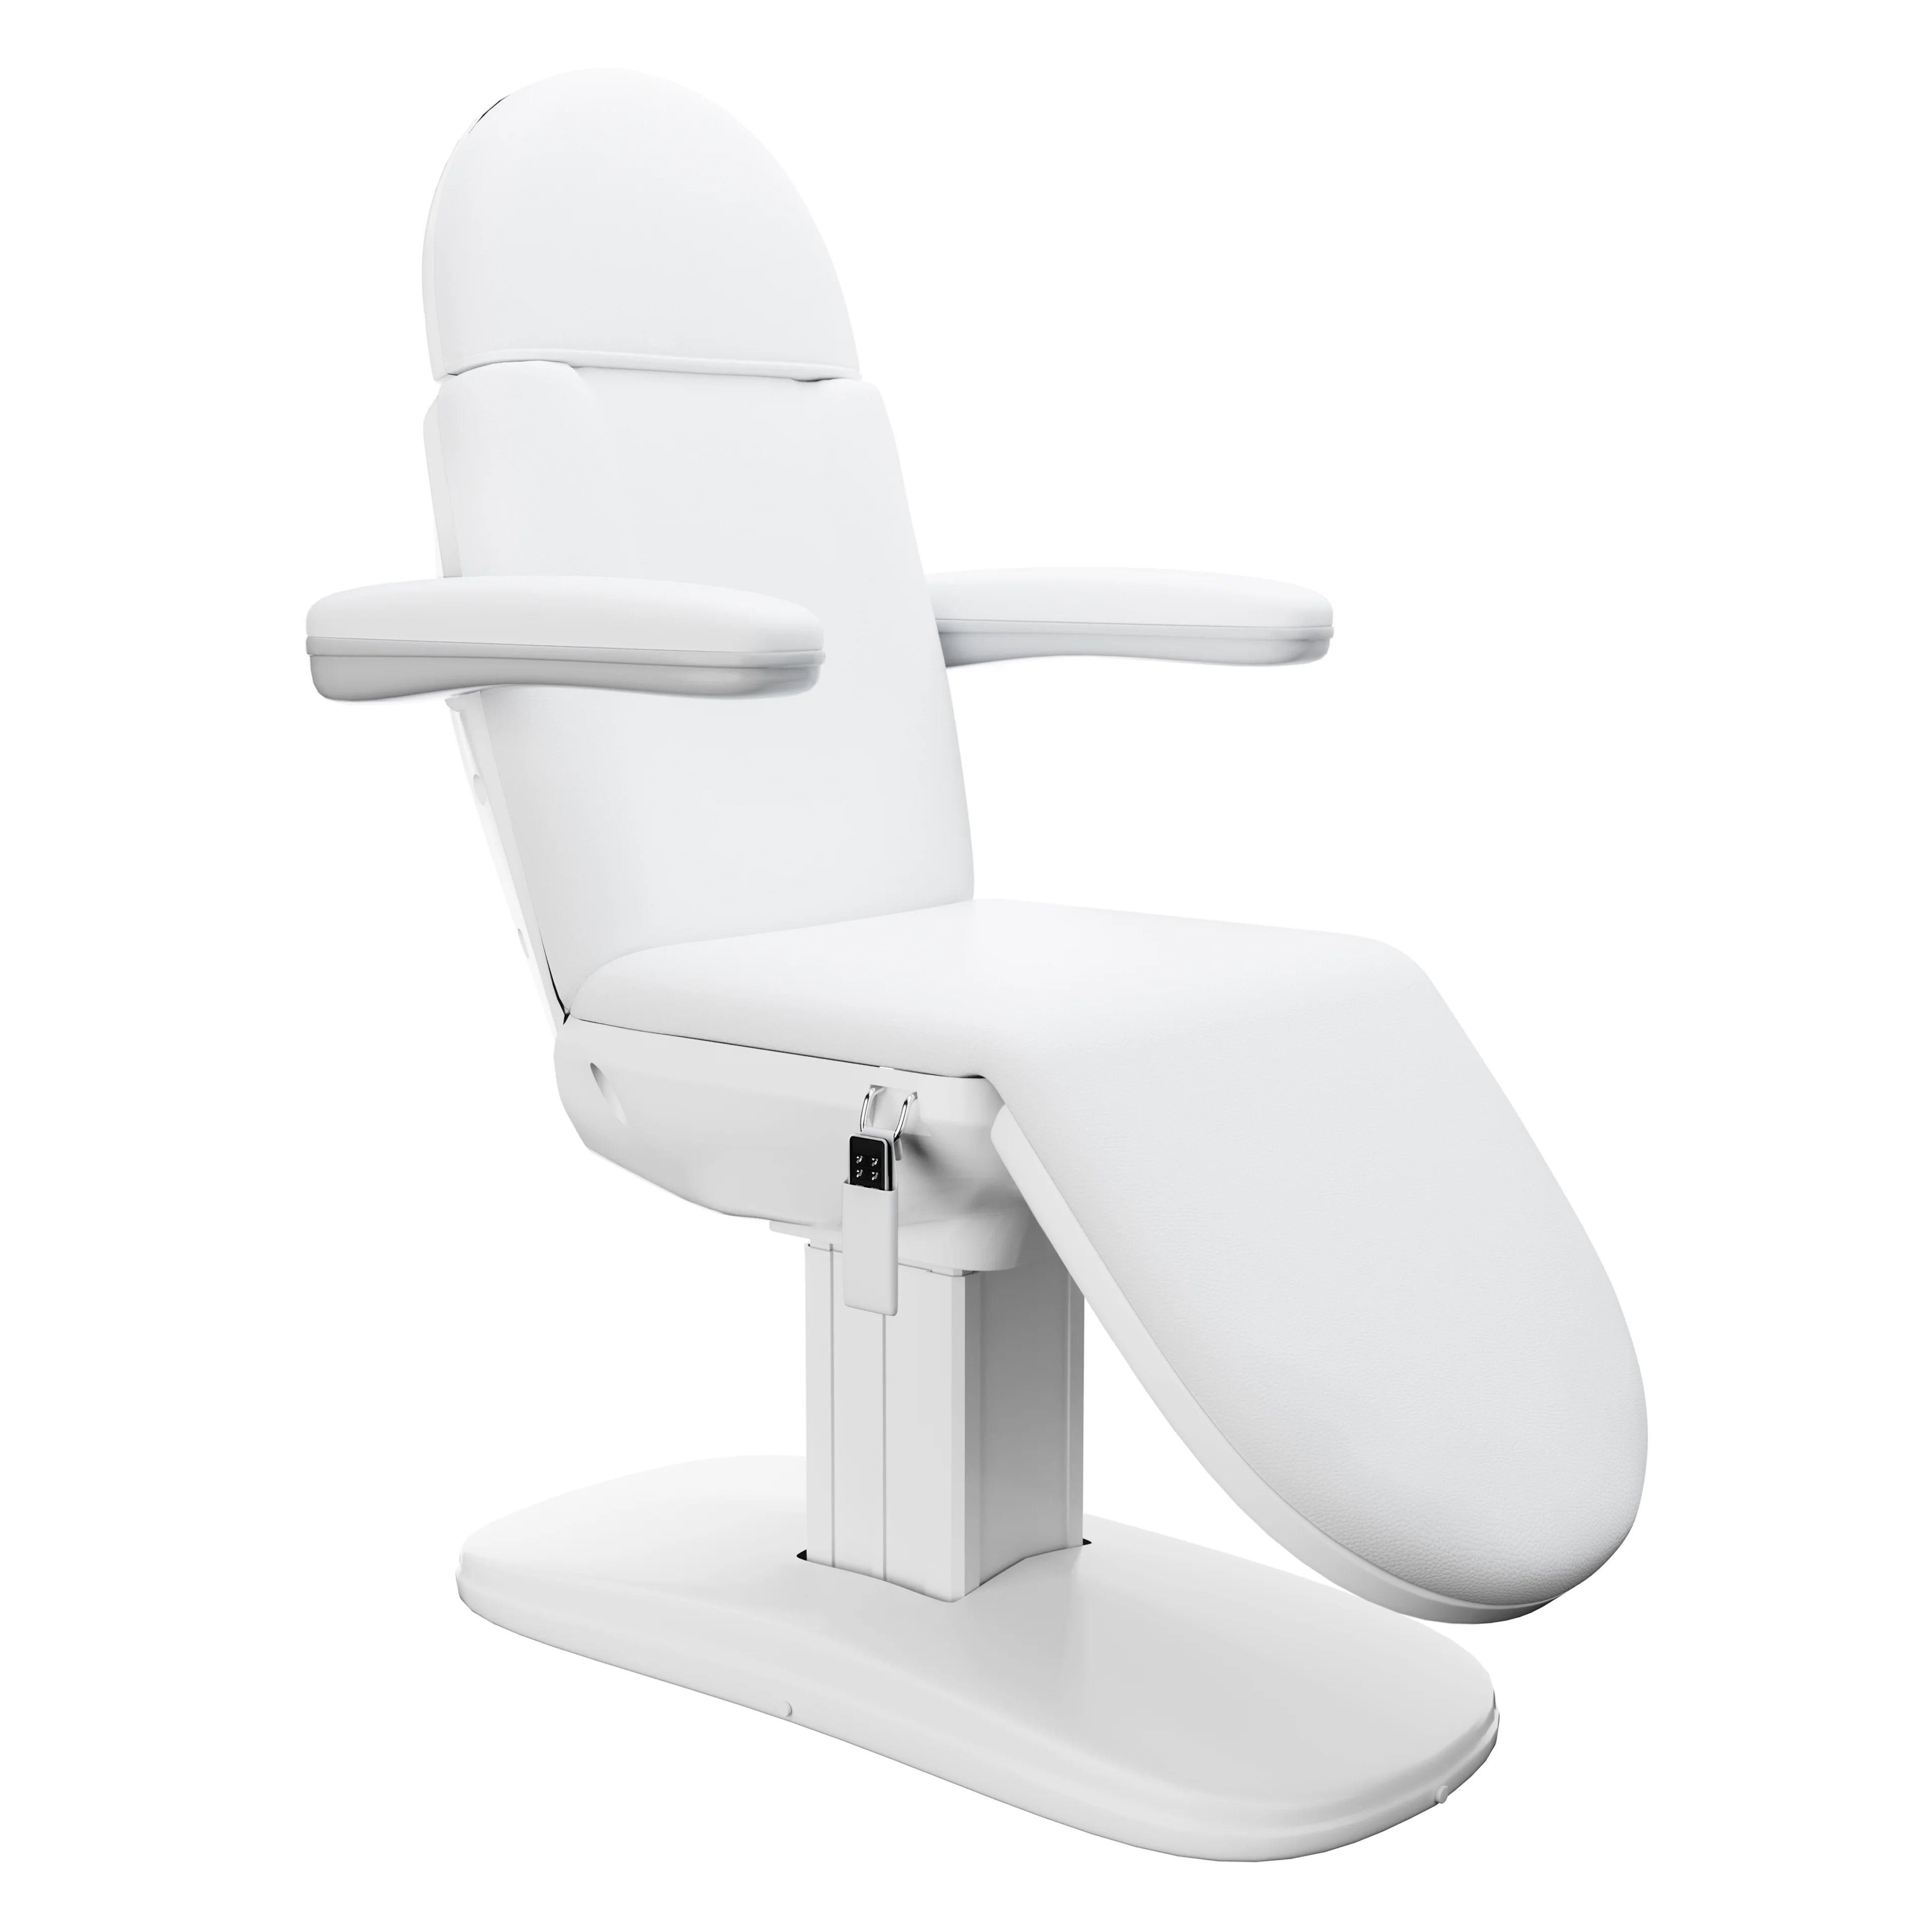 SpaMarc . Benefic (White) . 4 Motor Spa Treatment Chair/Bed . (Wireless Remote)